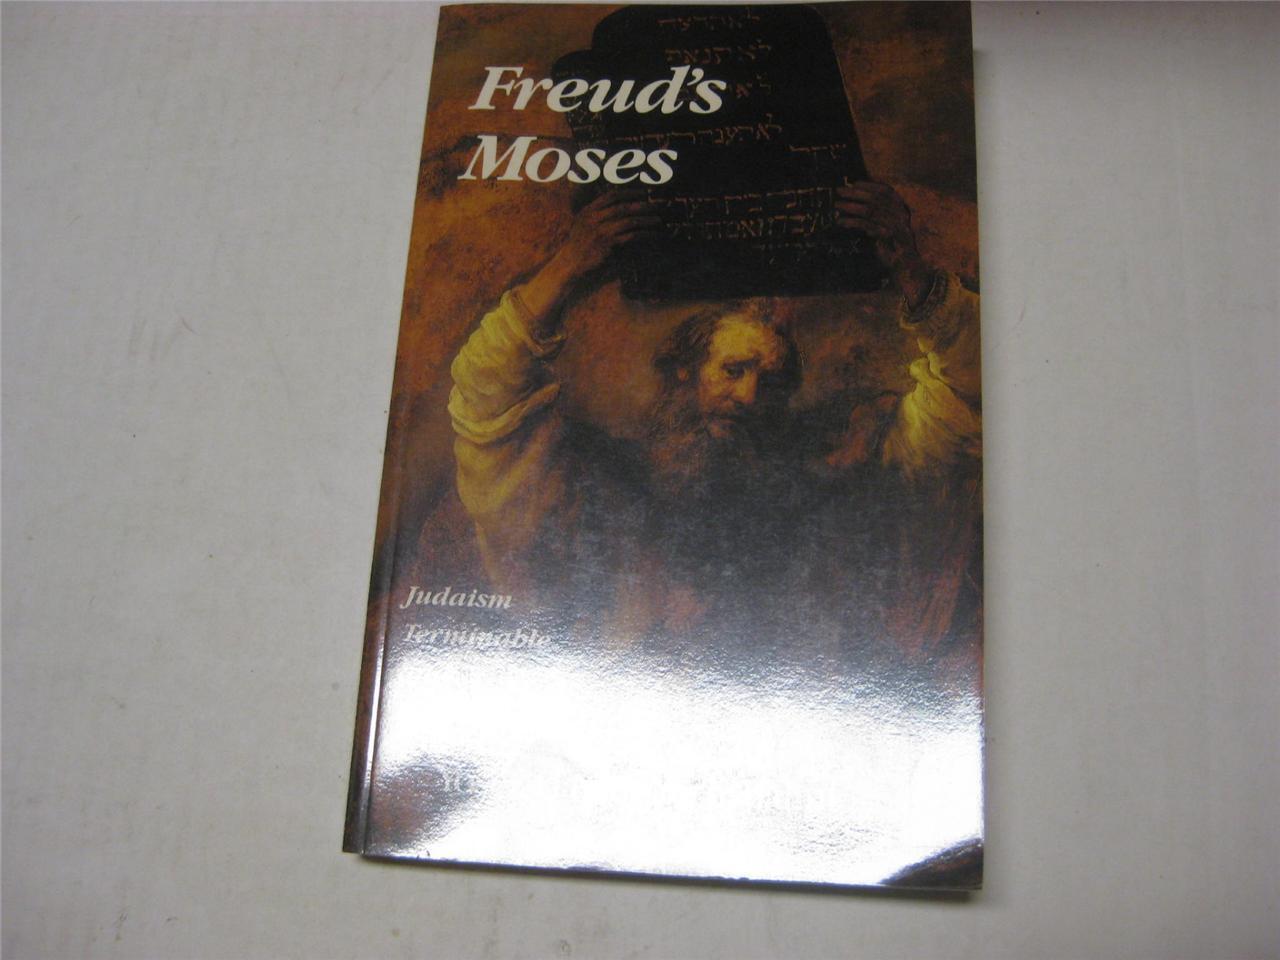 Freud's Moses: Judaism Terminable and Interminable by Yosef Hayim Yerushalmi